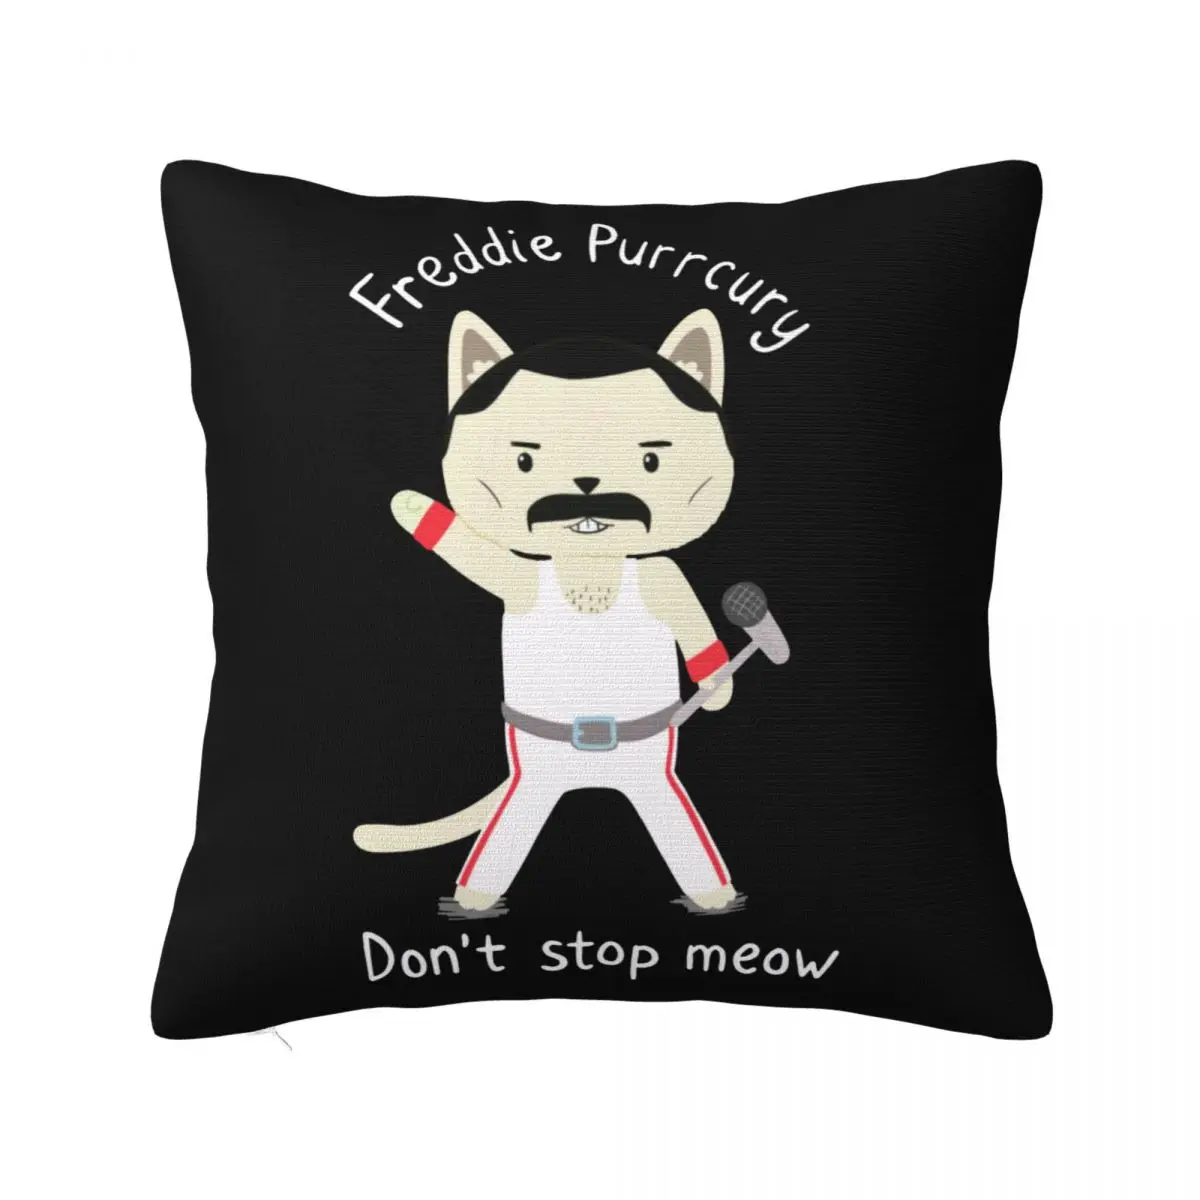 

Rock Metal Pillow Case Don t Stop Meow Cute Freddie Cat Soft Polyester Pillowcase Bed Zipper Spring Cover